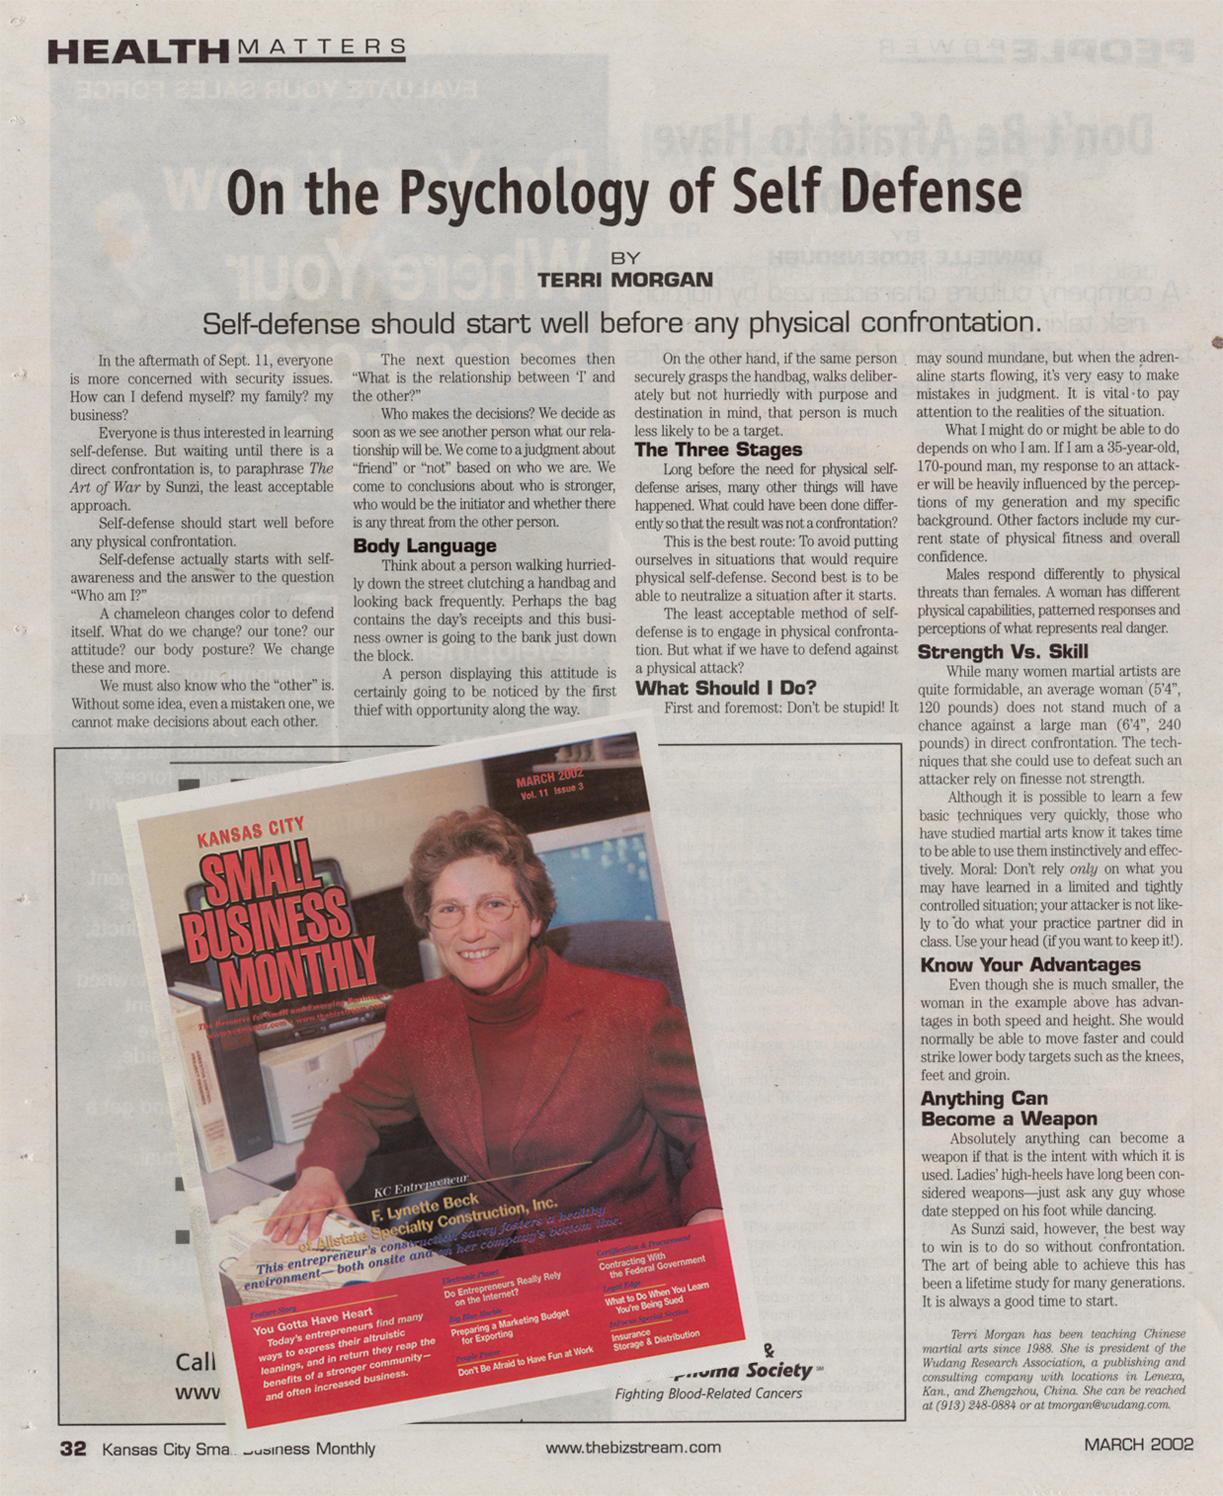 On The Psychology Of Self-Defense, Terri Morgan, Kansas City Small Business Monthly March 2002